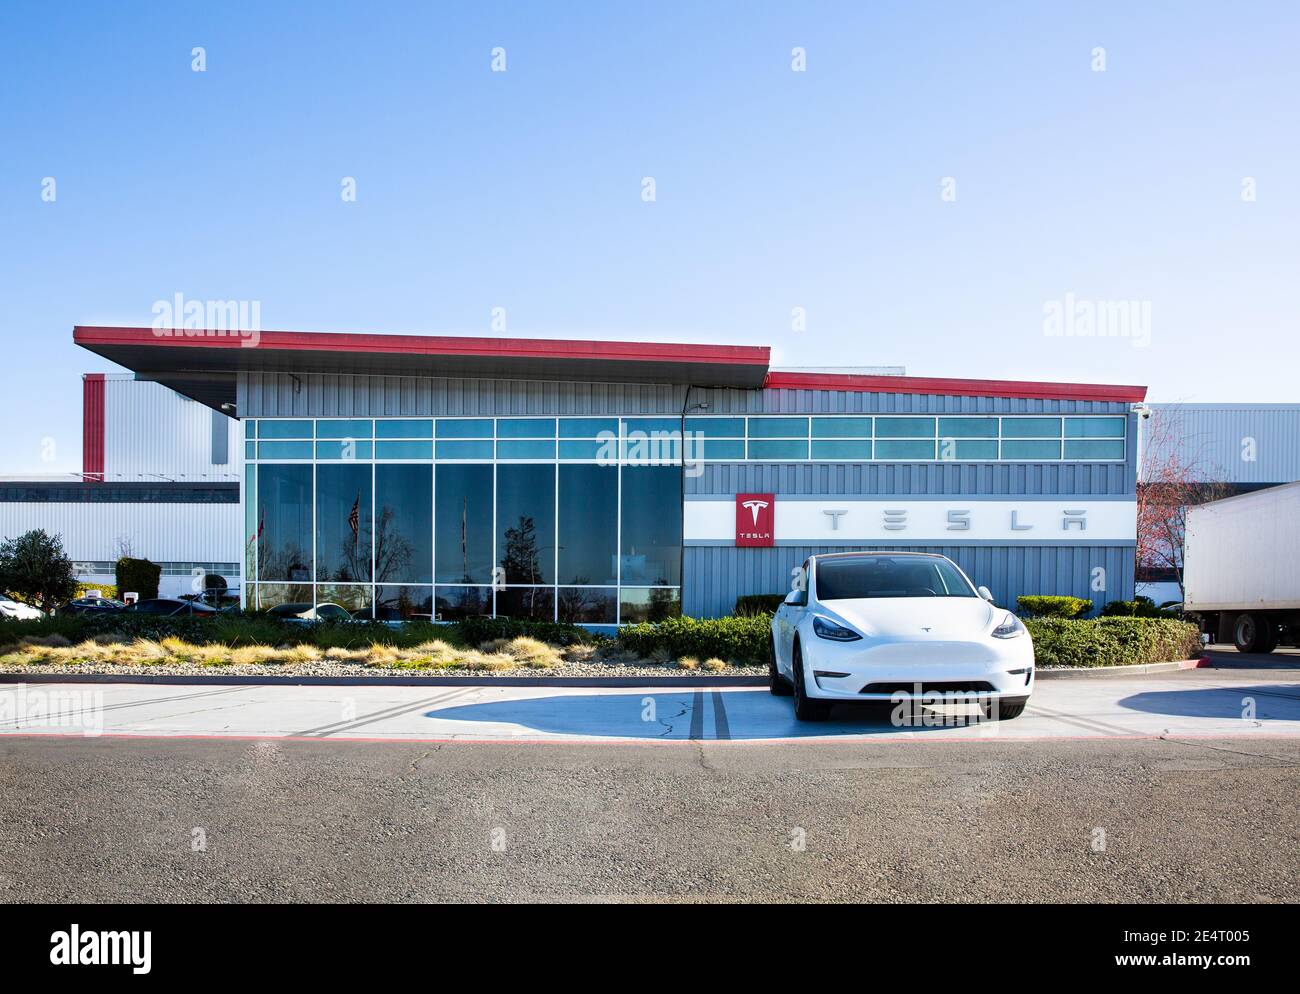 Fremont, CA, USA - January 20, 2021: Tesla factory plant,  an American electric vehicle and clean energy company based in Palo Alto, California Stock Photo